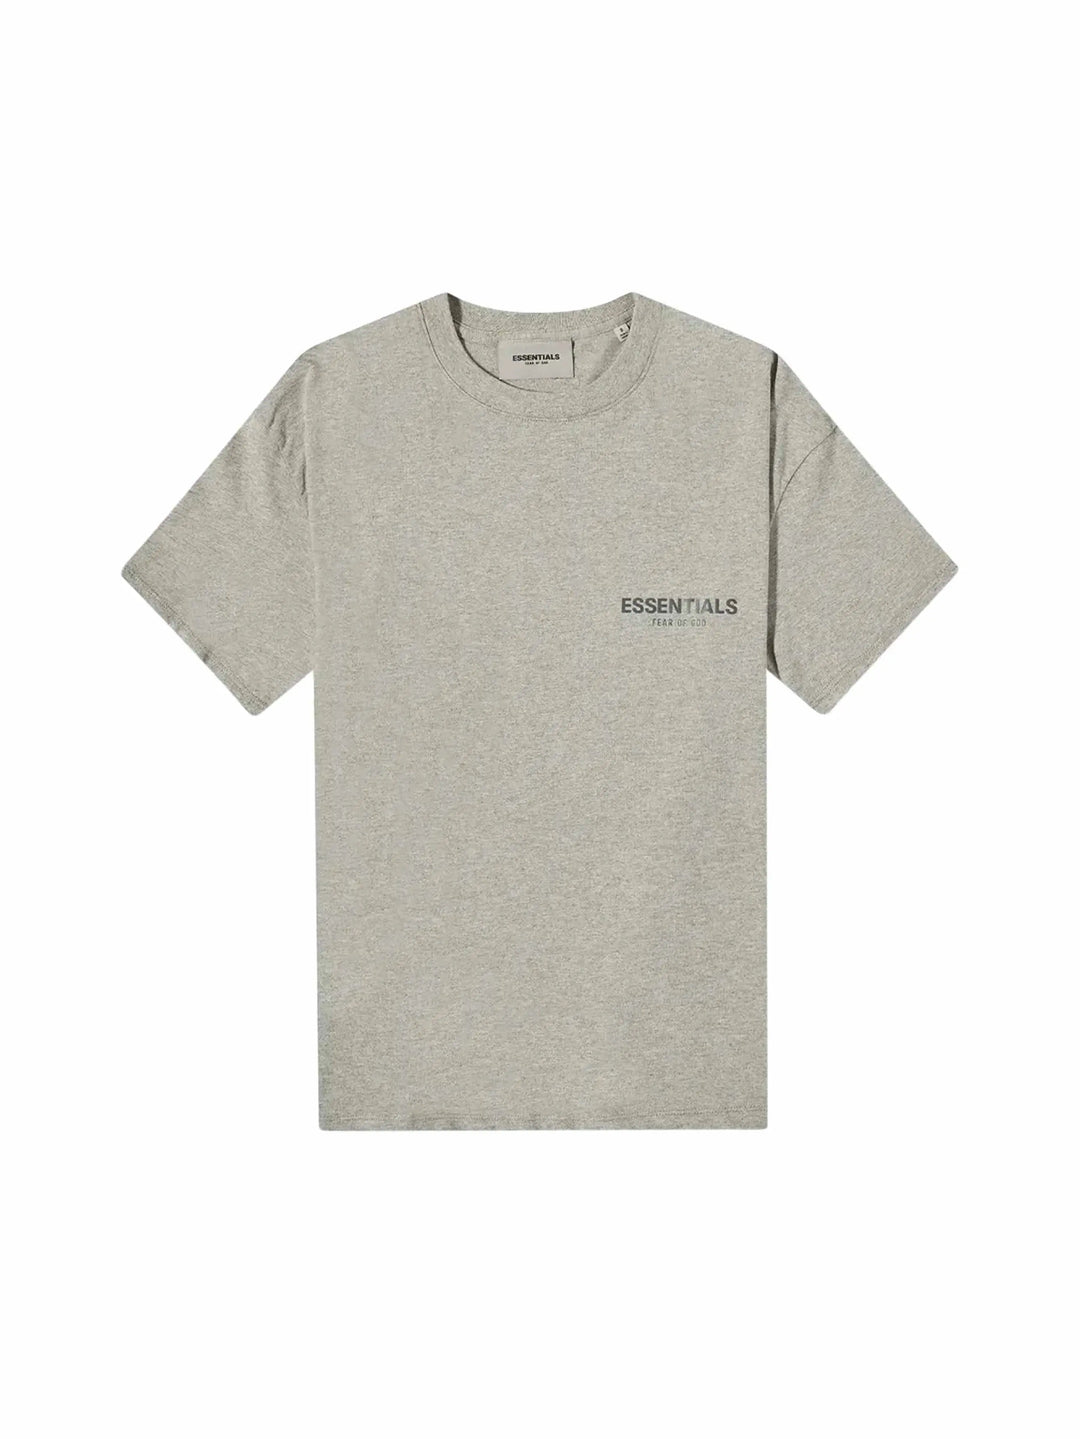 Fear of God Essentials Core Collection T-shirt Dark Heather Oatmeal in Auckland, New Zealand - Shop name